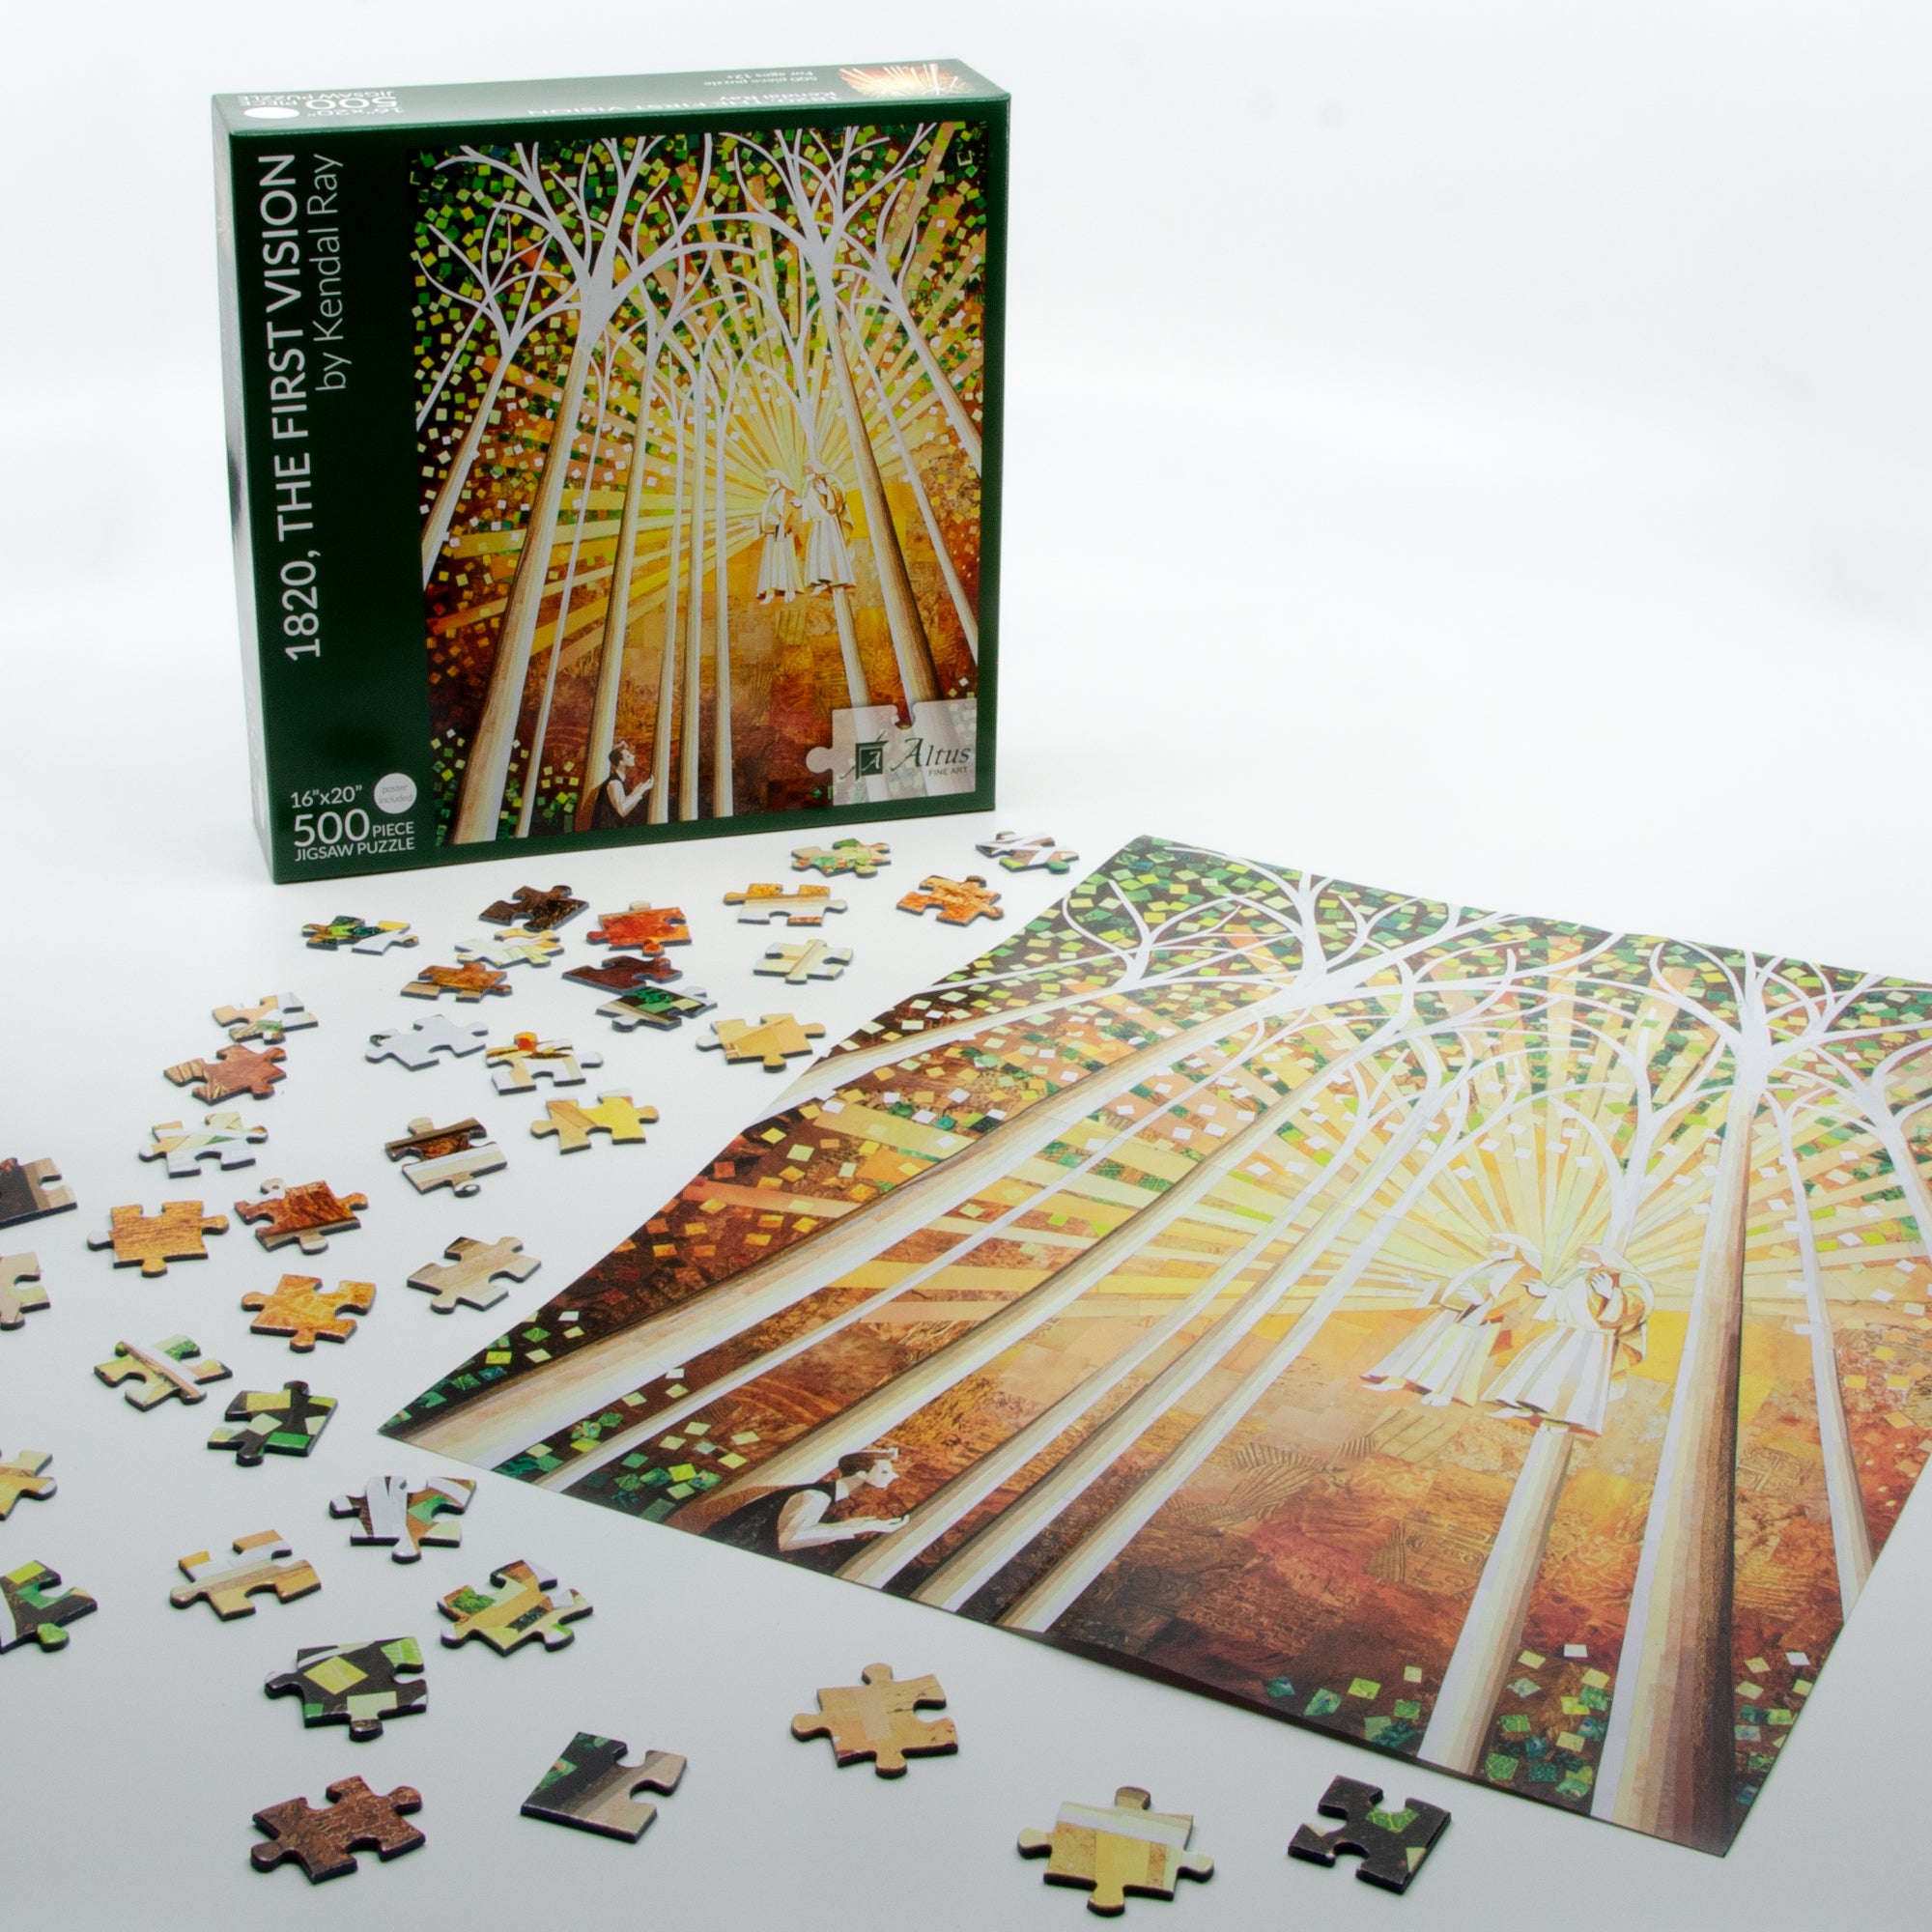 1820, The First Vision 500 Piece Puzzle